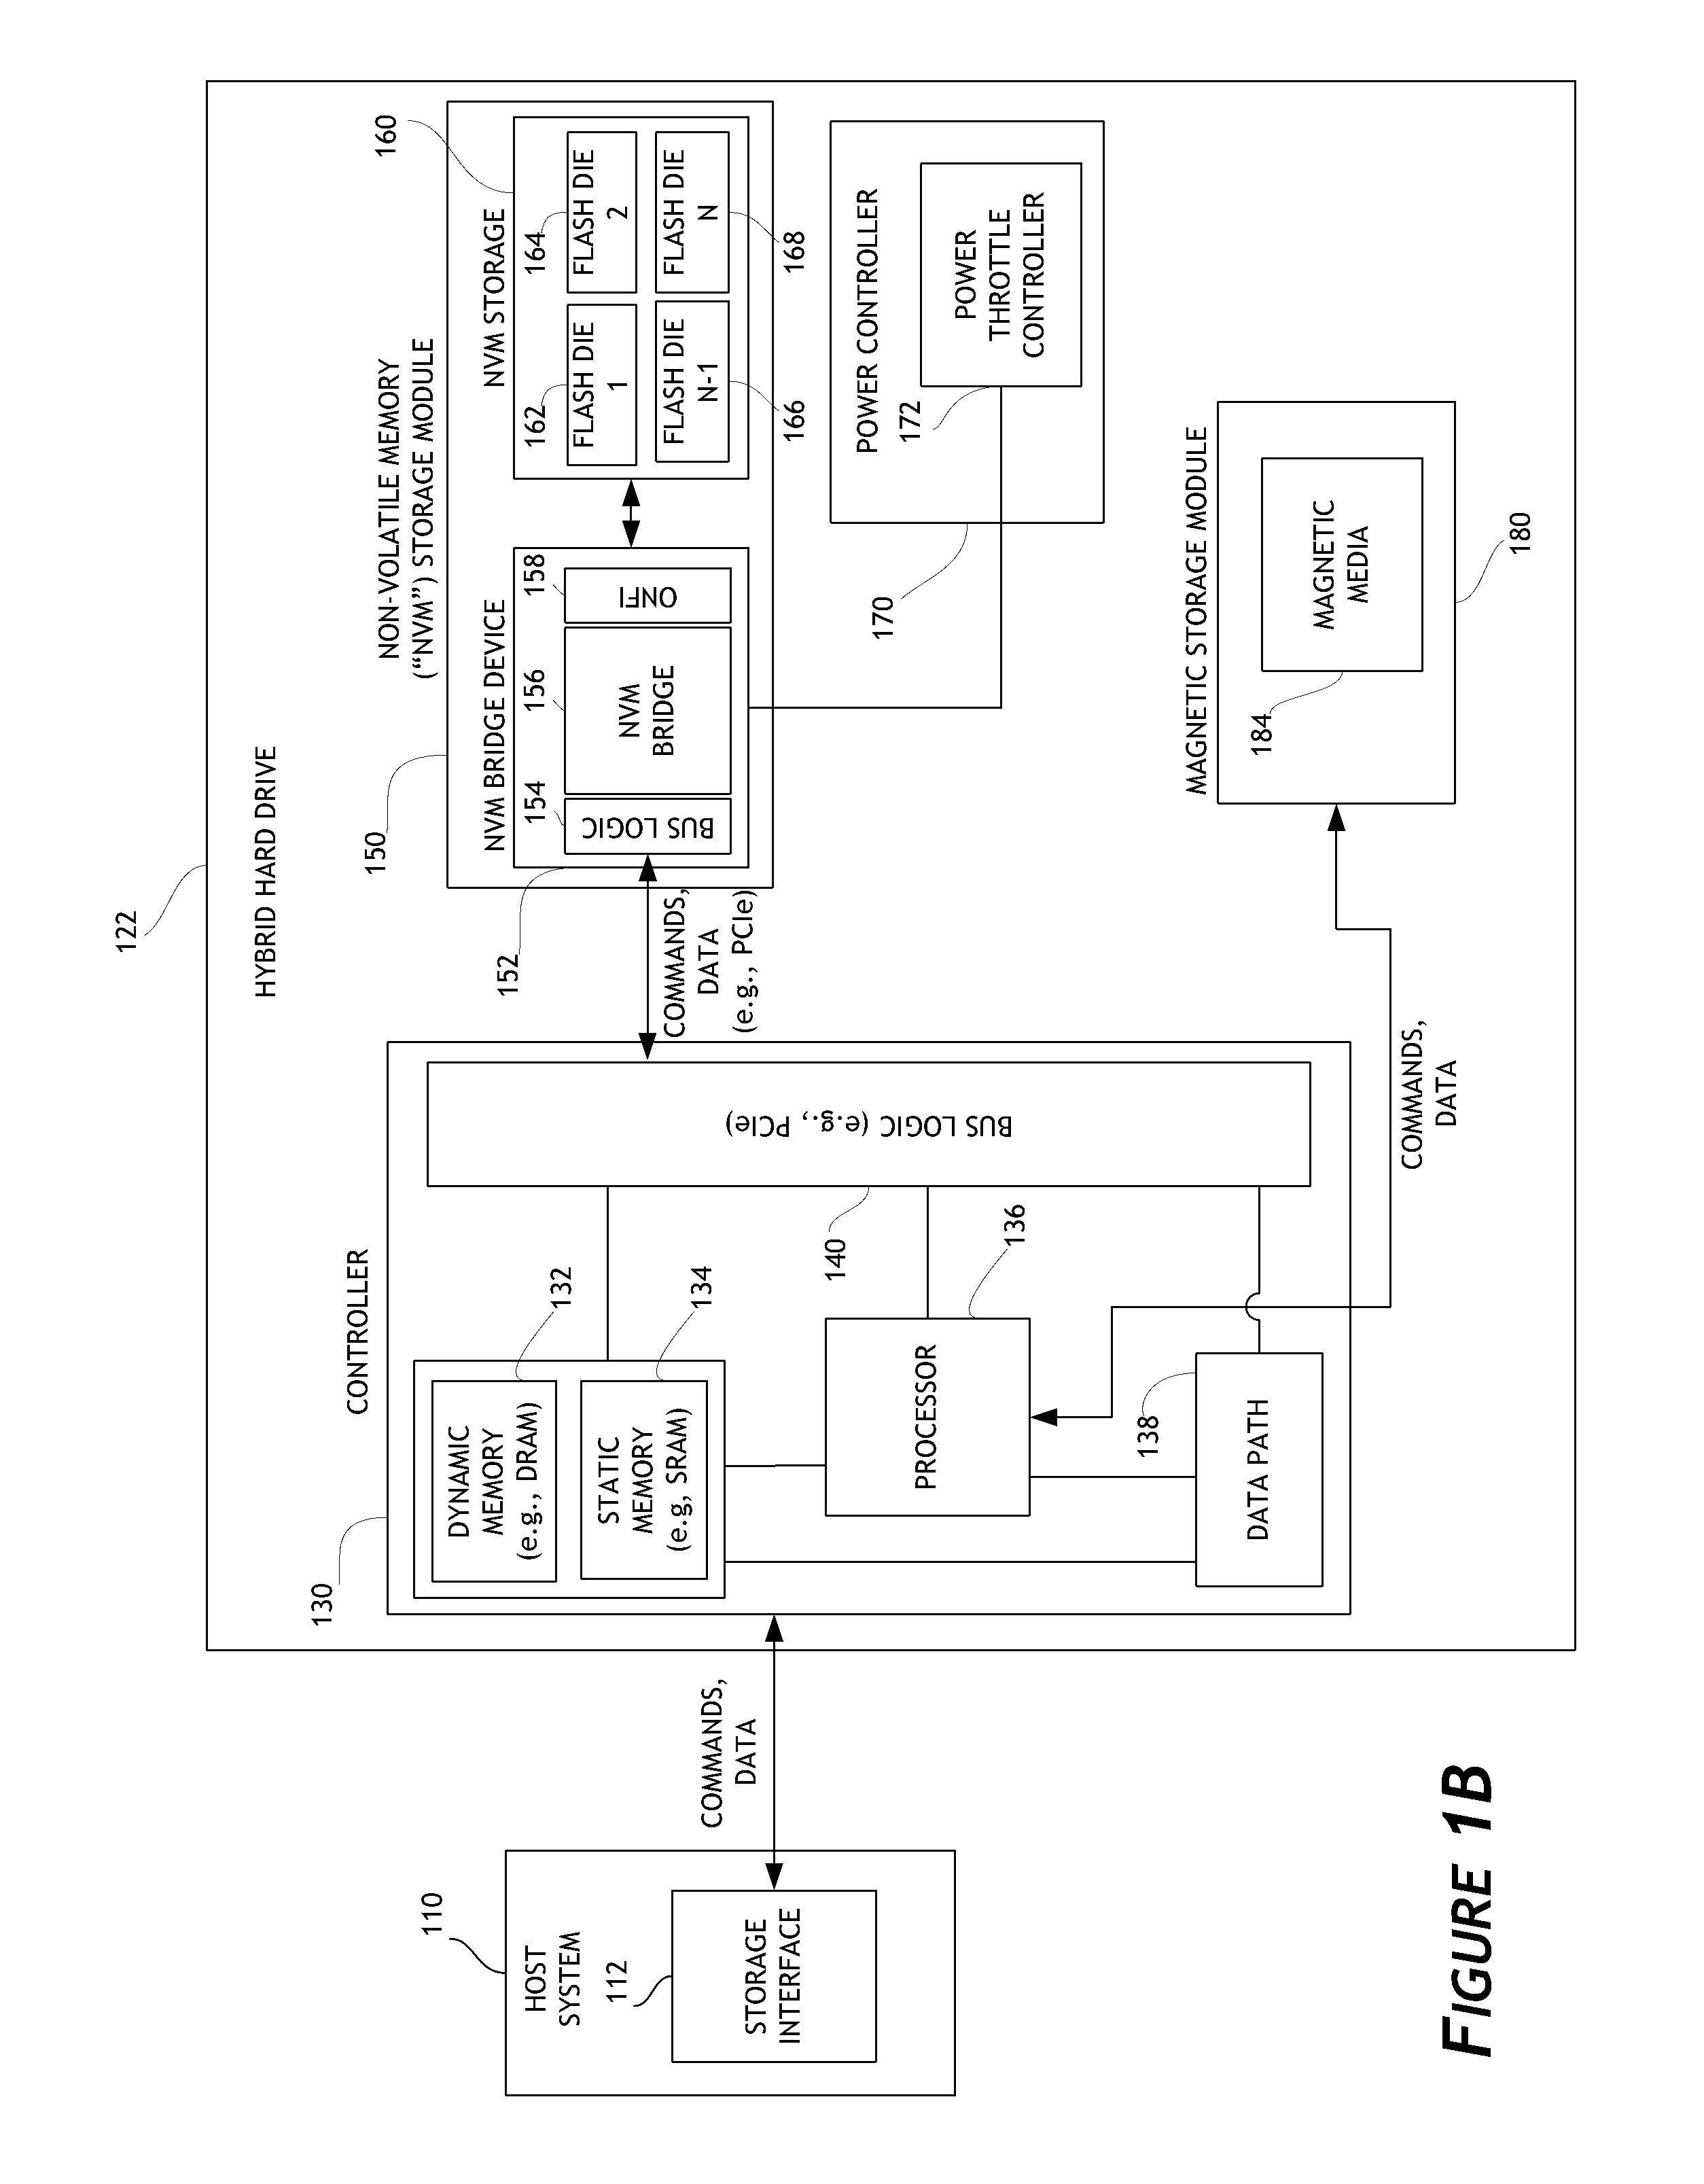 Systems and methods for error injection in data storage systems